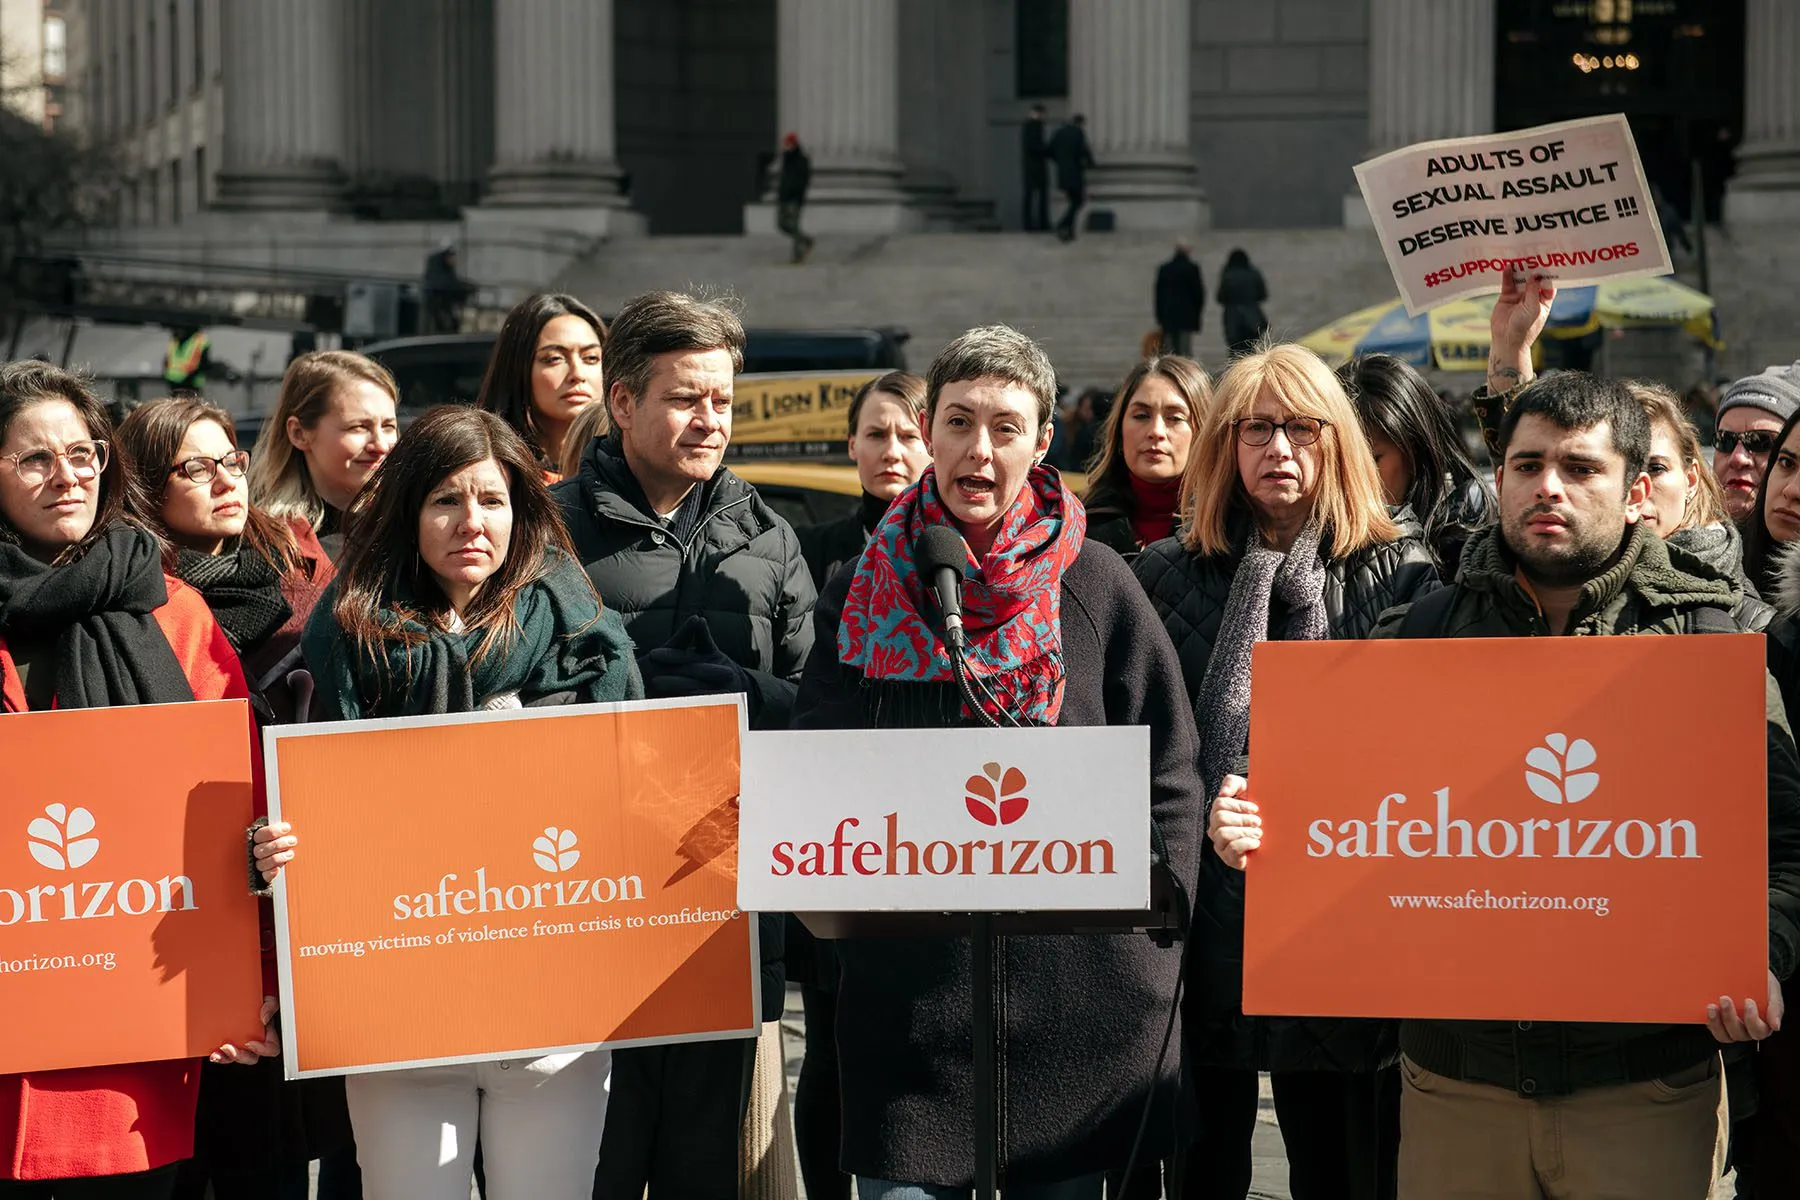 Marissa Hoechstetter speaks at a rally in support of the Adult Survivors Act in February 2020 in New York City.